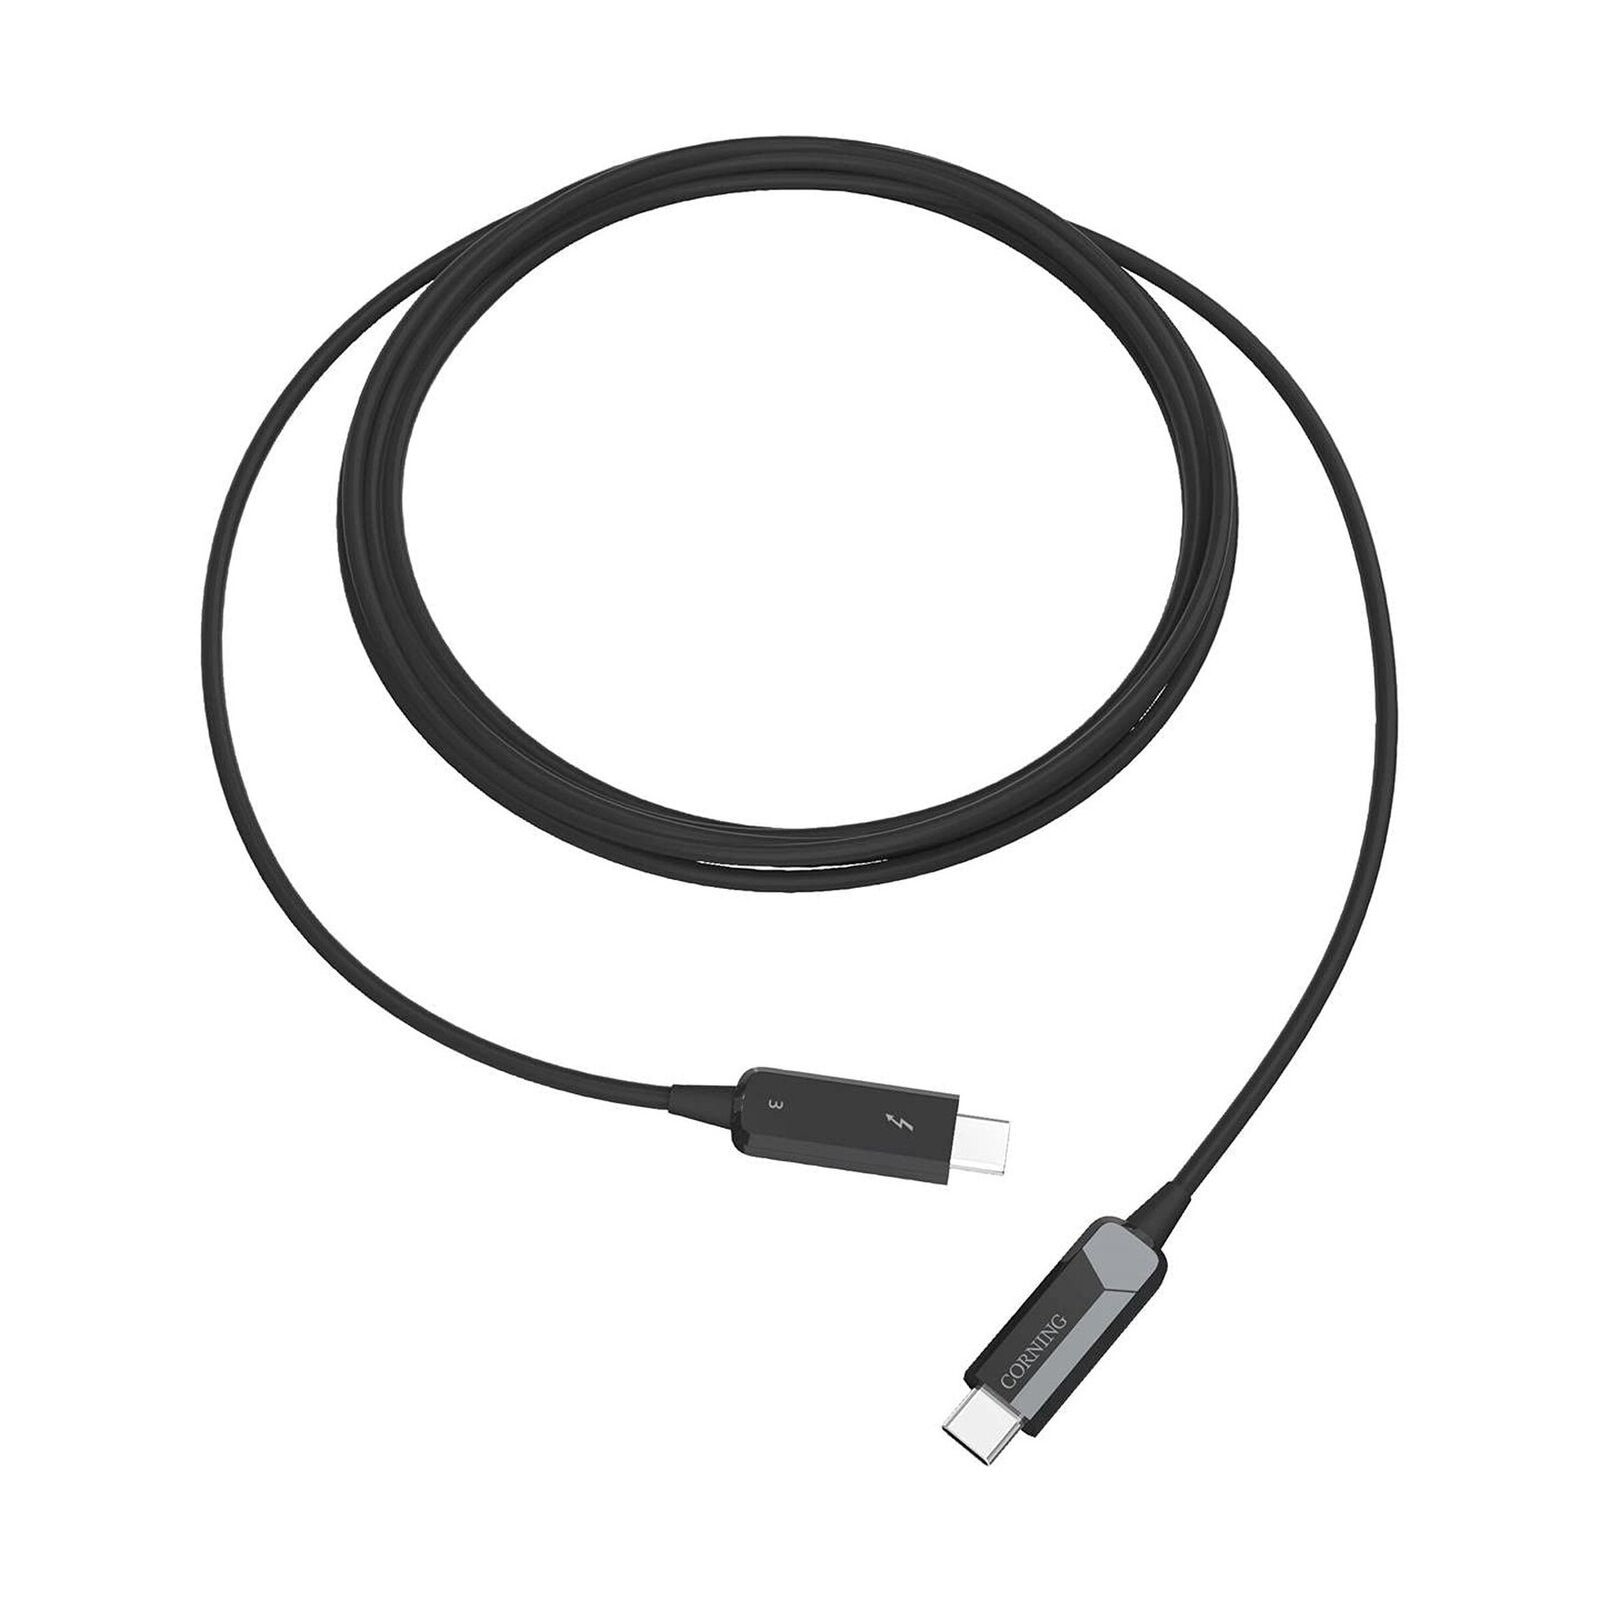 Optical Cables by Corning Thunderbolt 3 USB Type-C Male Optical Cable, 15m